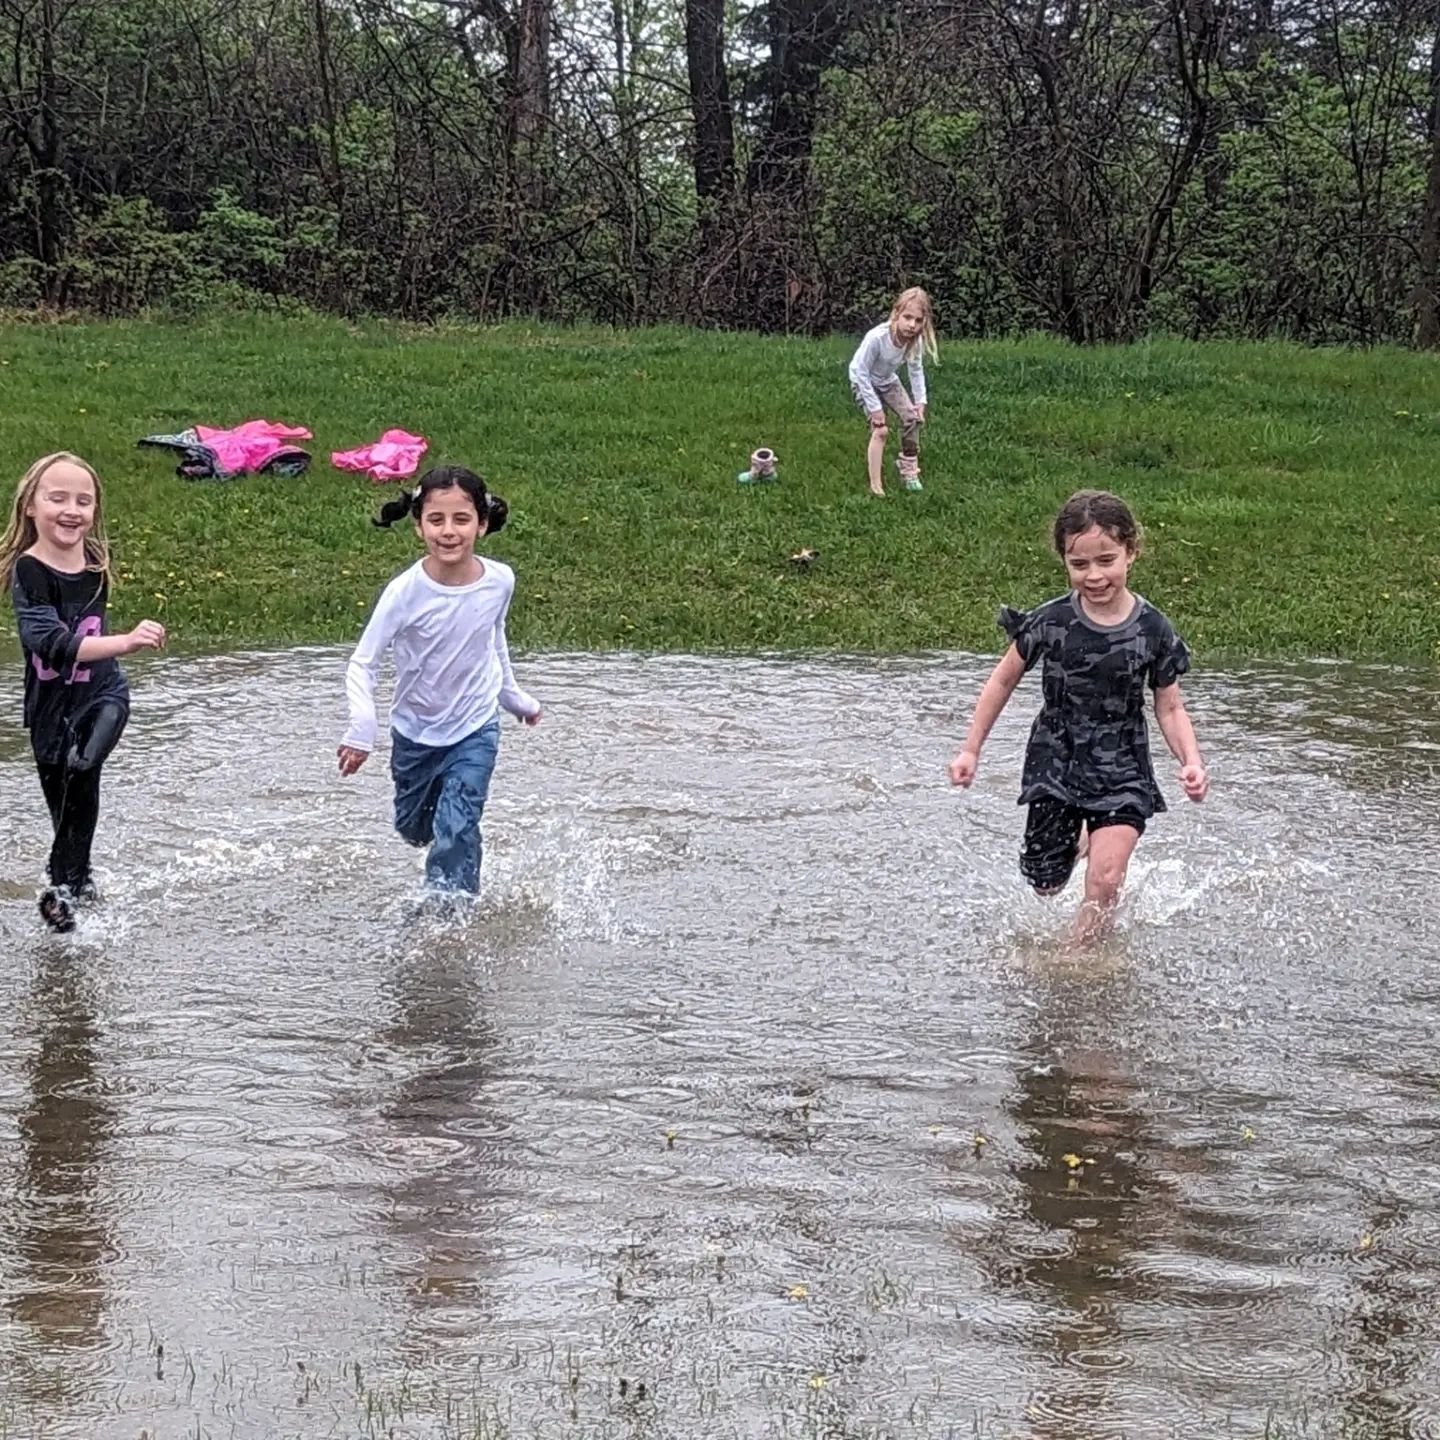 &ldquo;When life throws you a rainy day, play in the puddles.&rdquo; ~ Winnie the Pooh